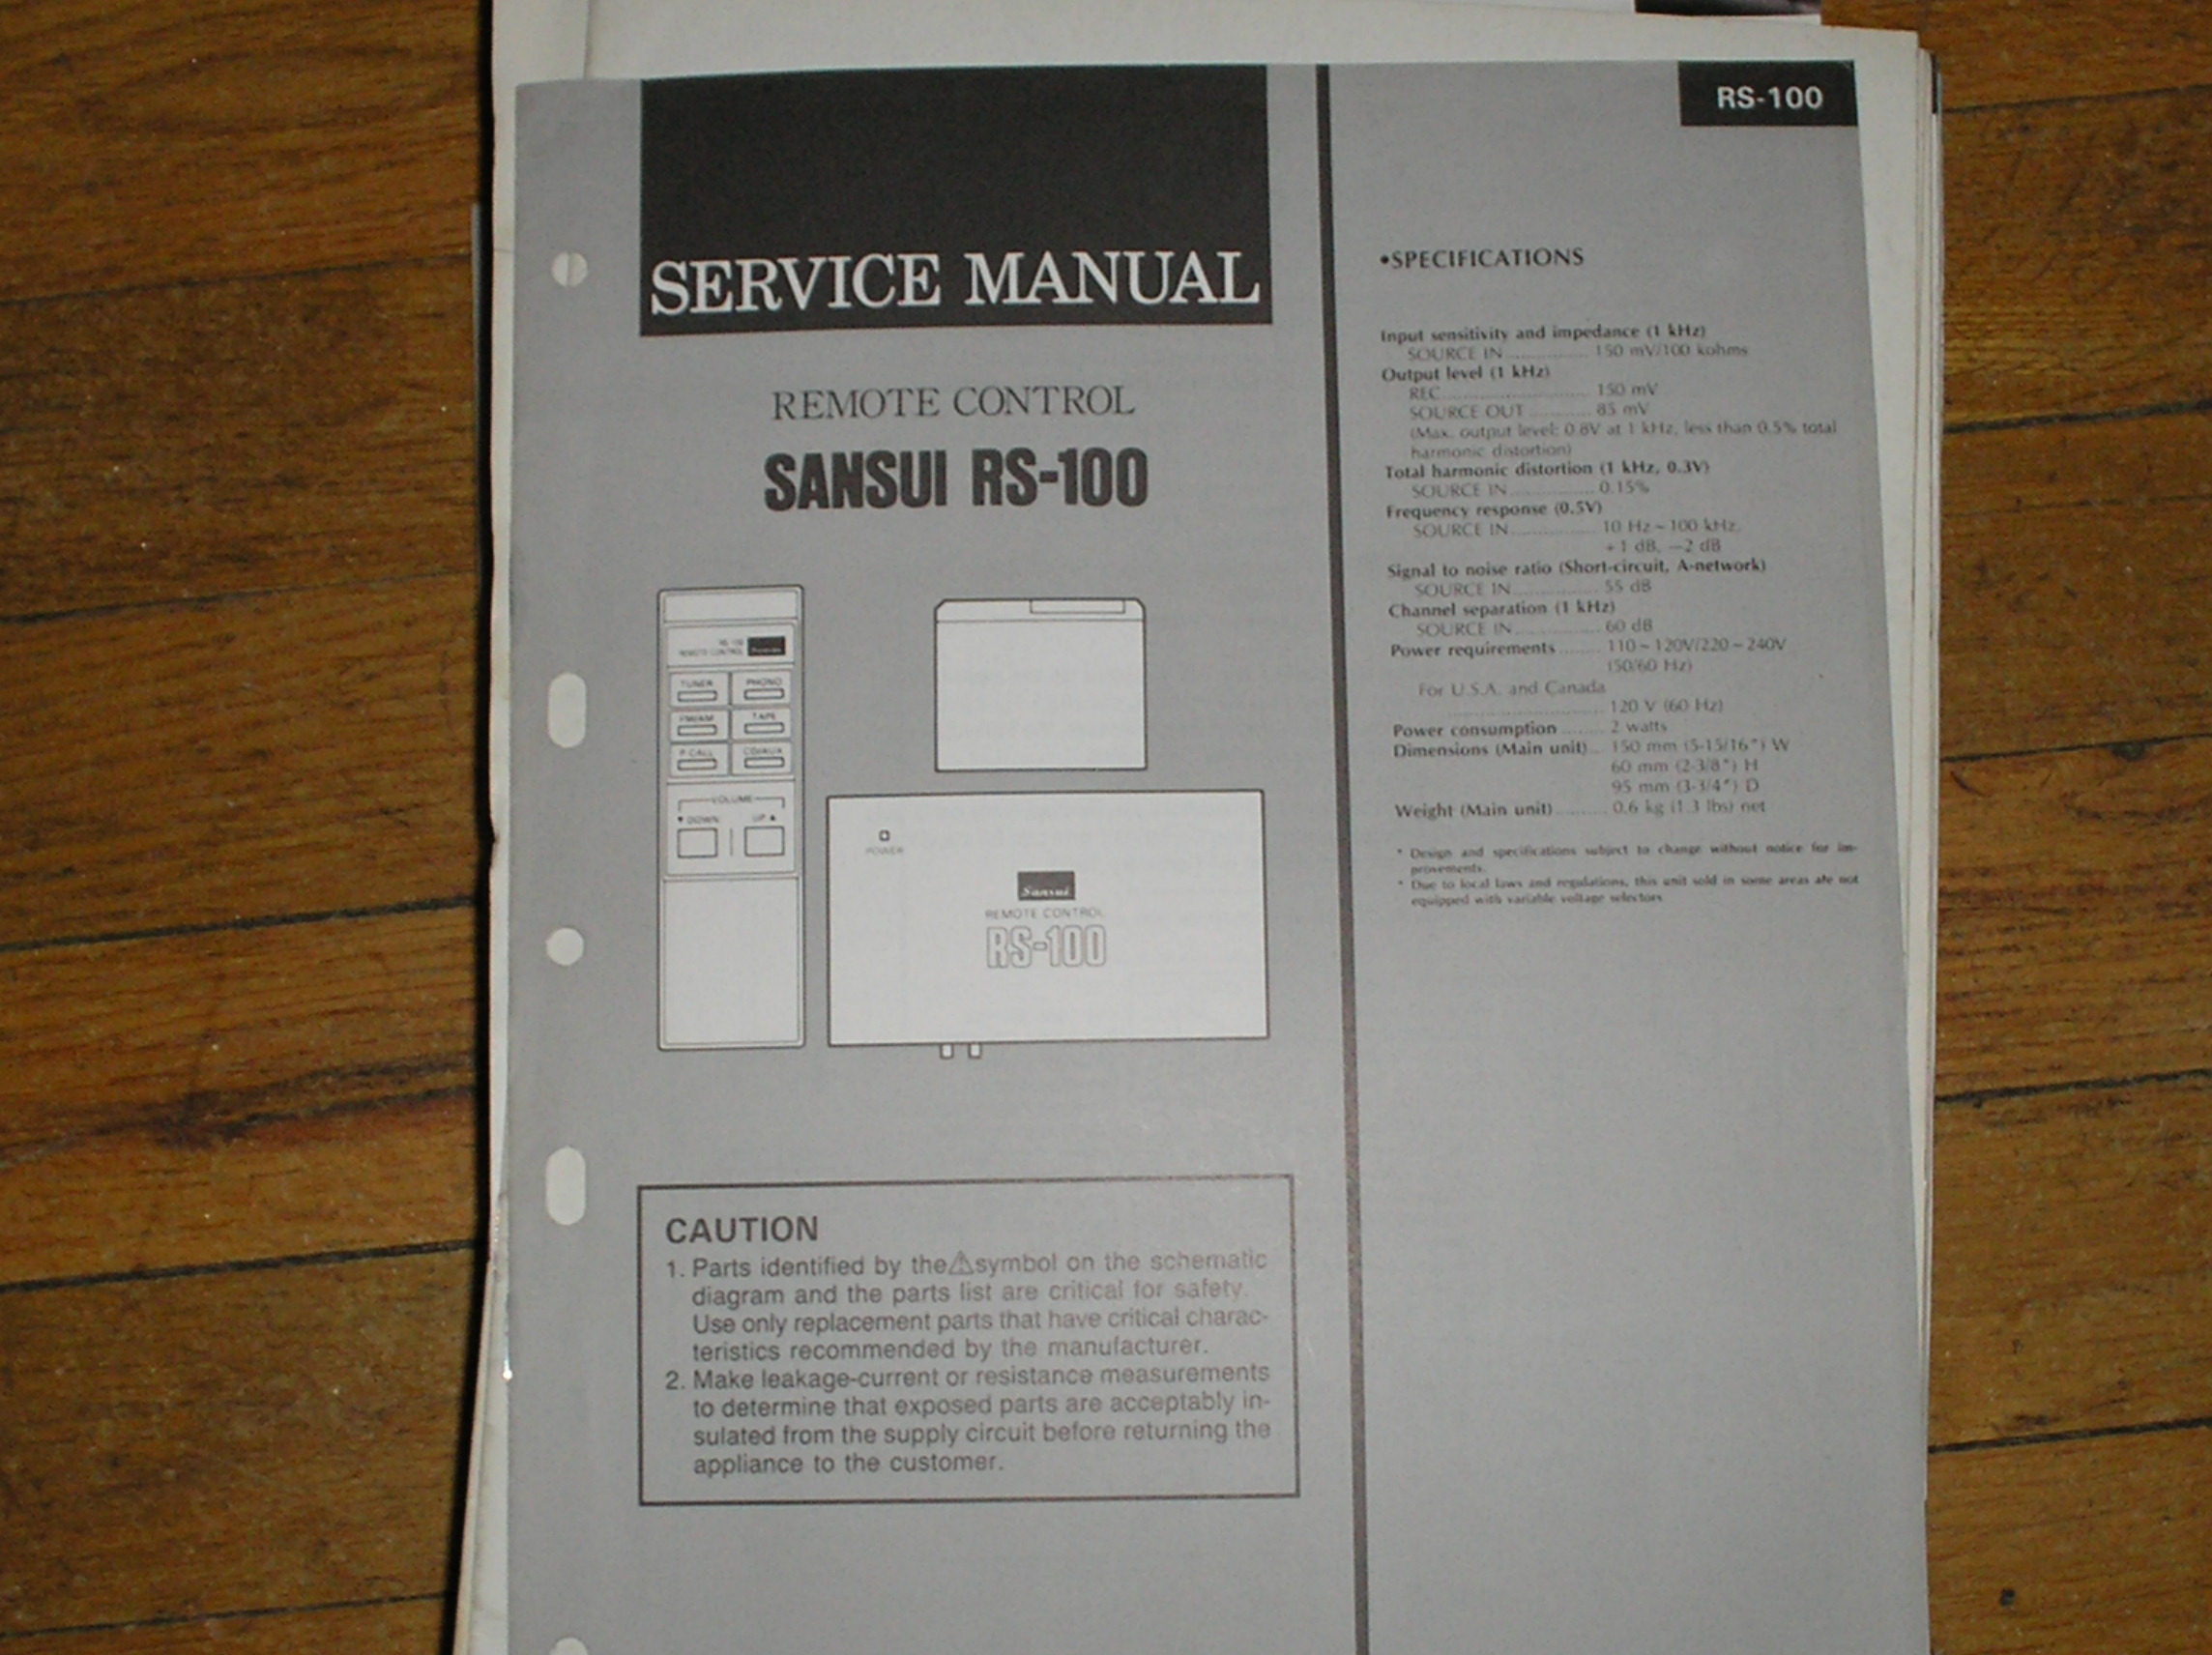 RS-100 Remote Control System Service Manual